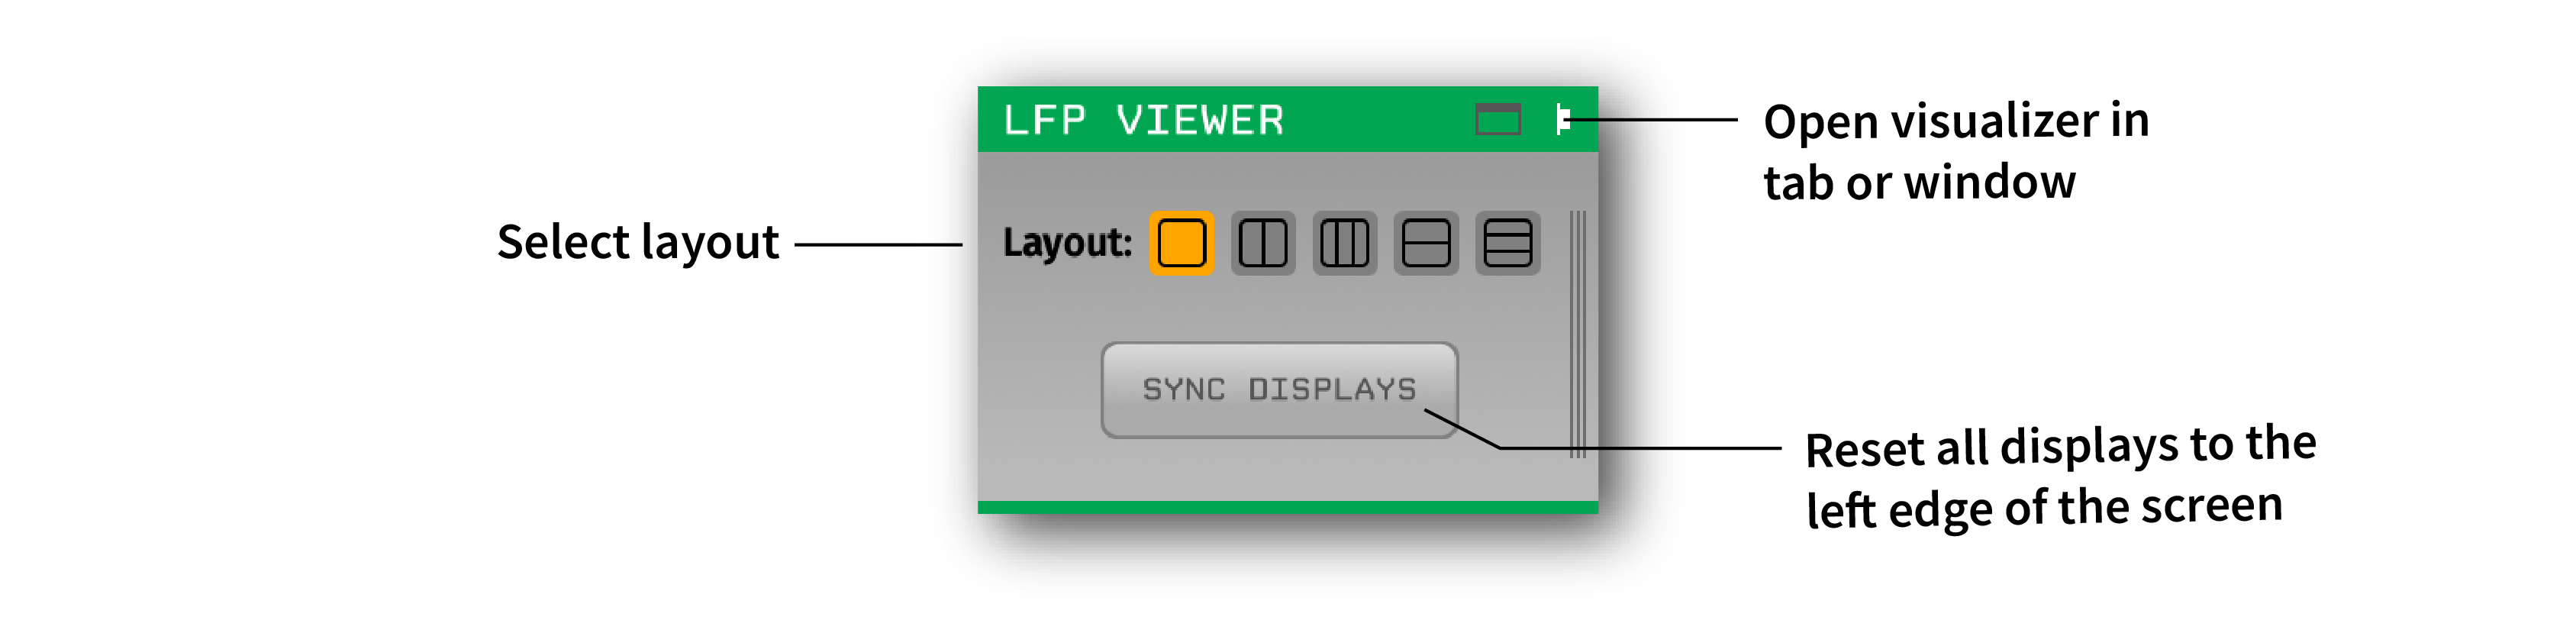 Annotated LFP Viewer settings interface